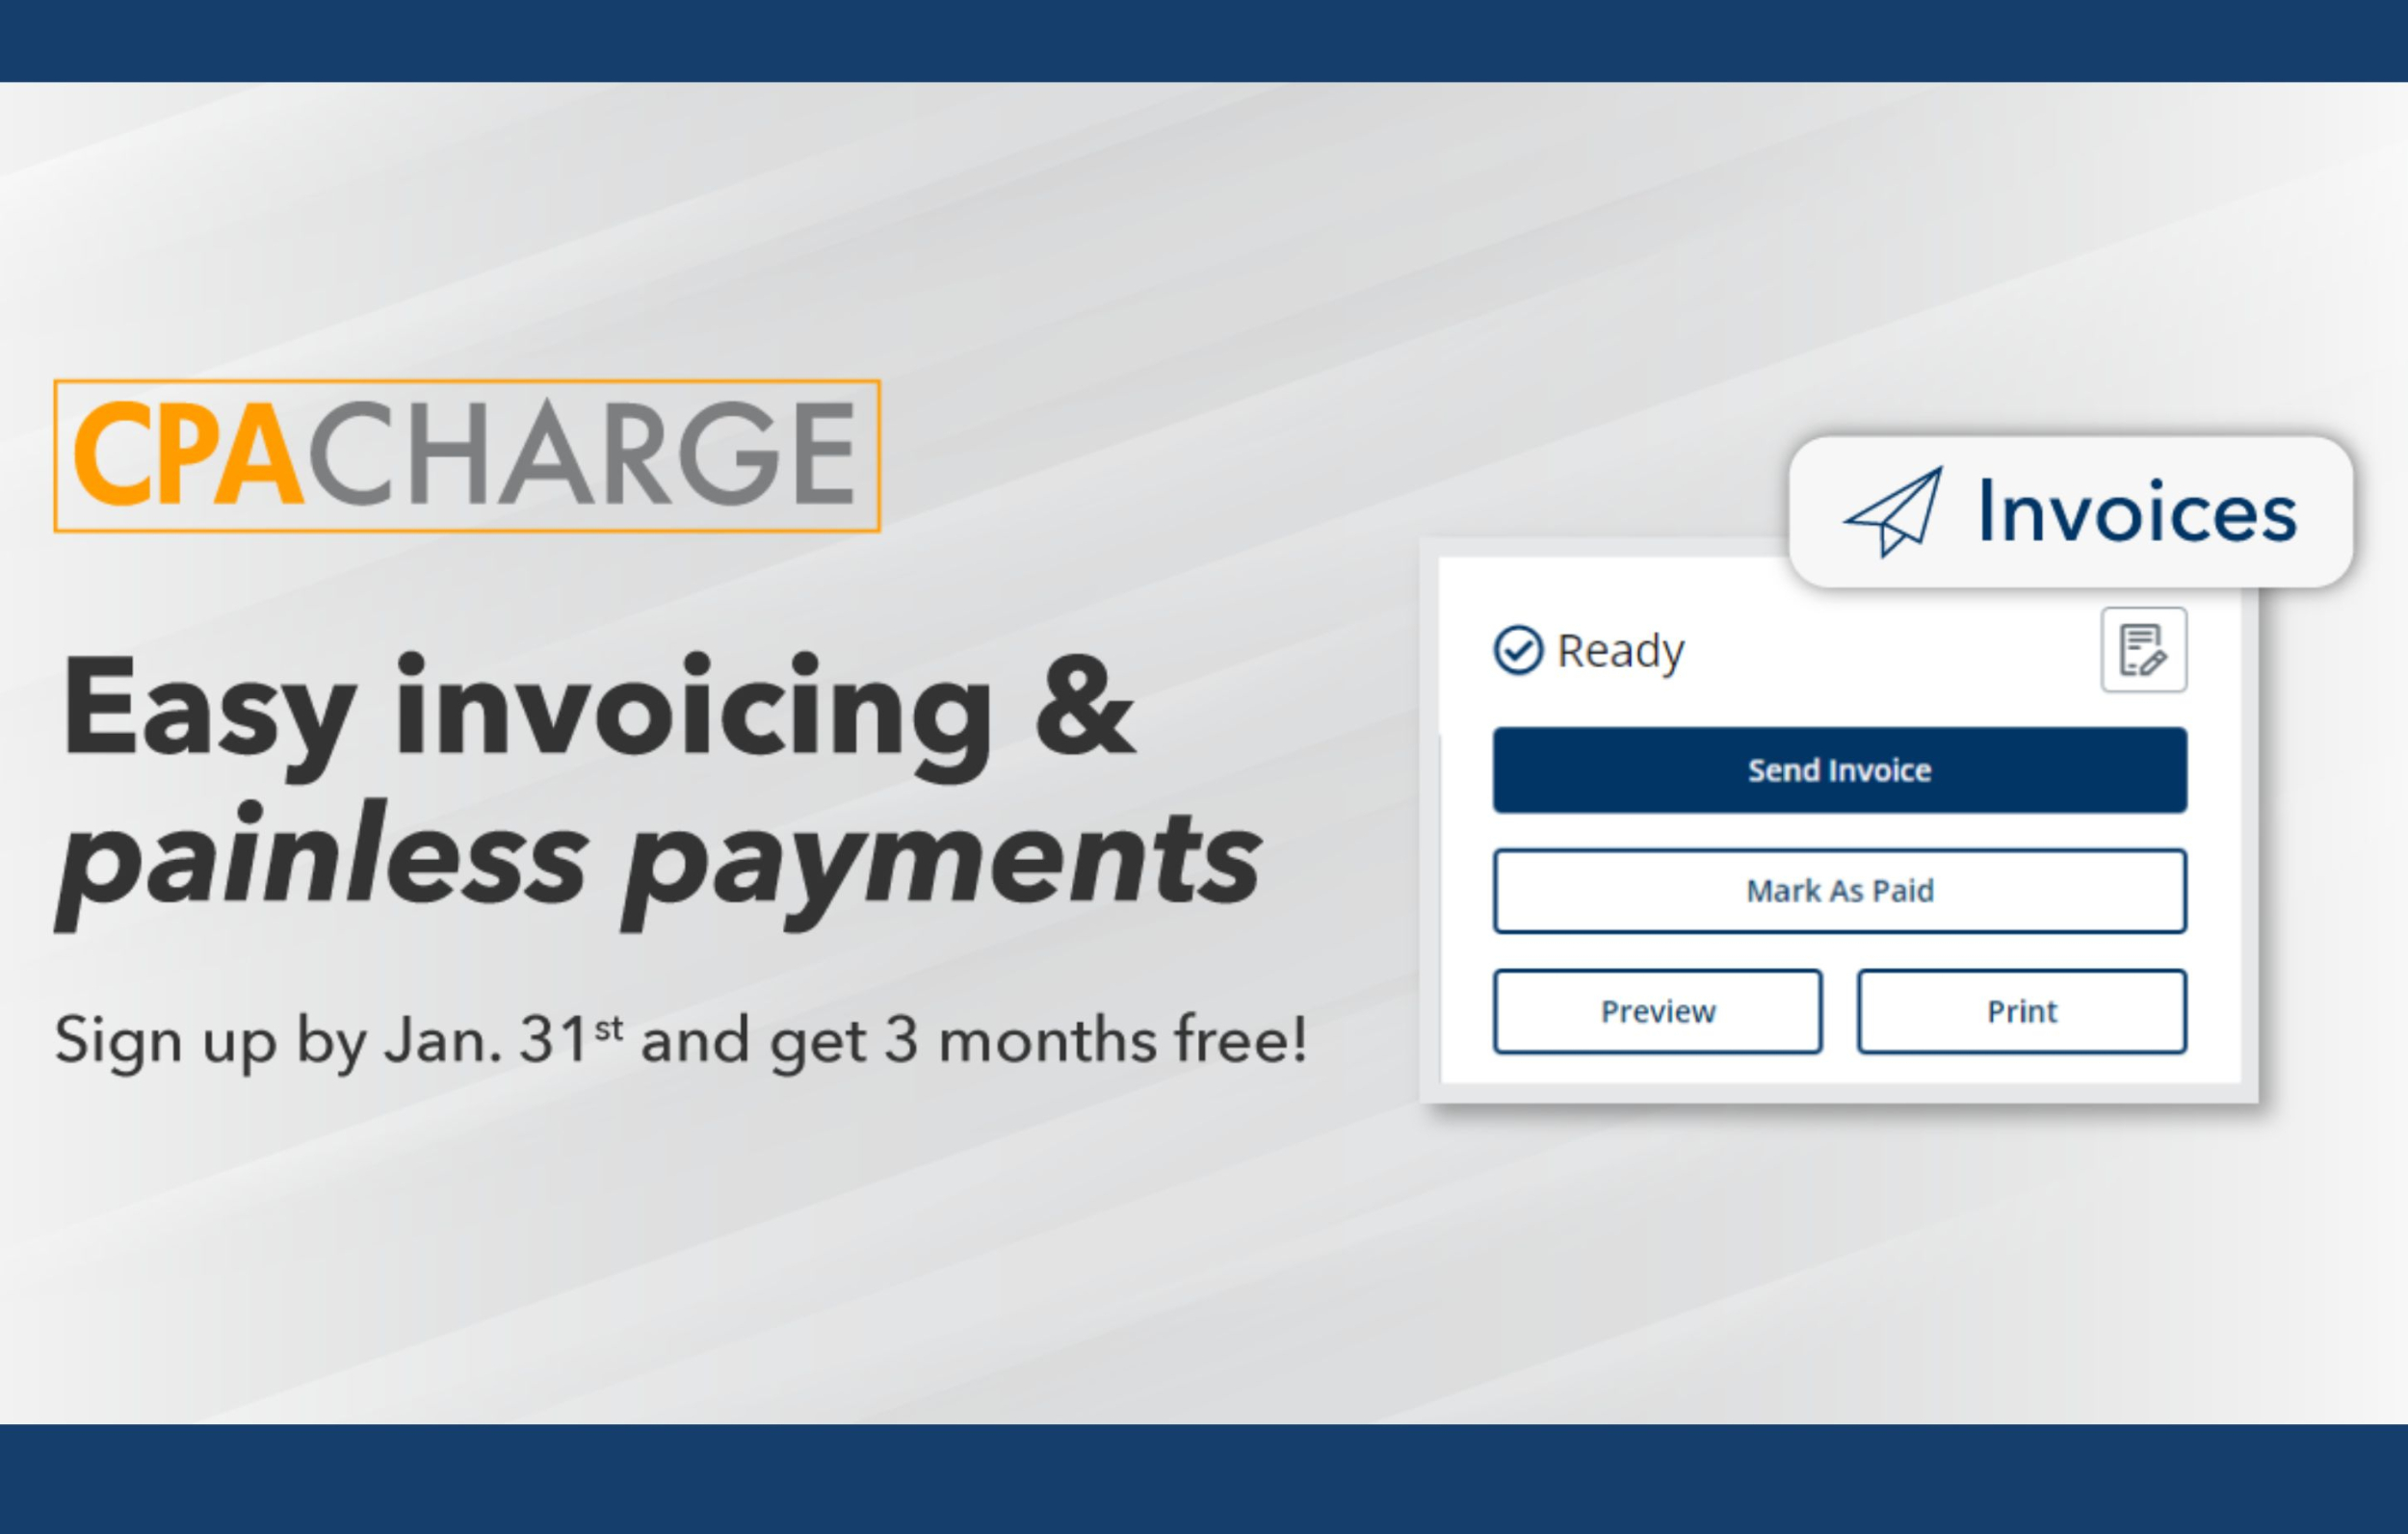 Blog Ad | CPA Charge